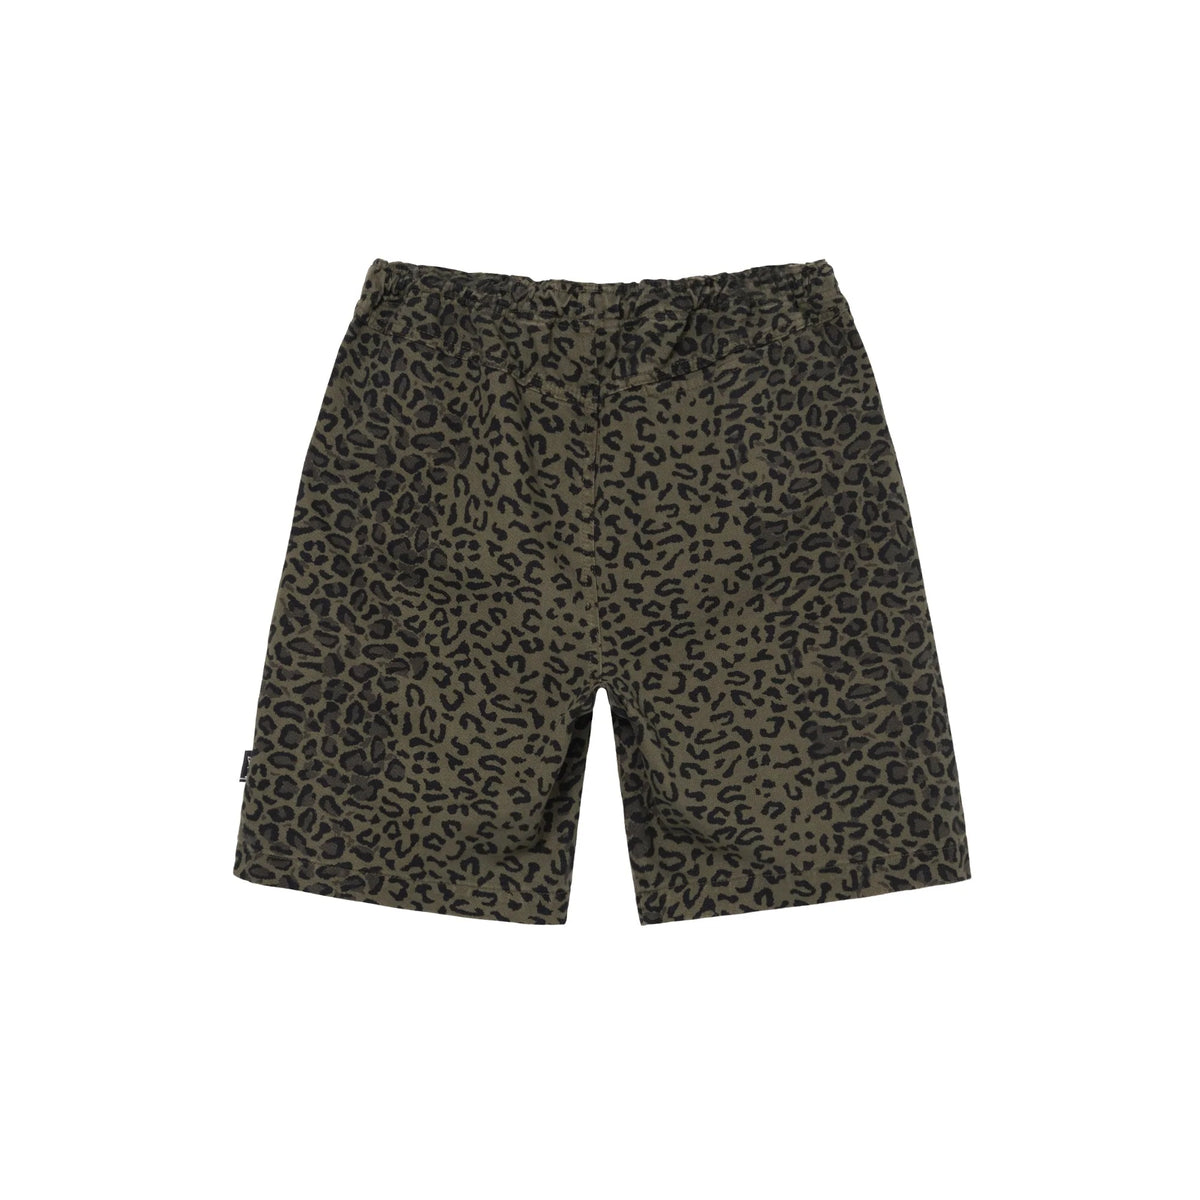 FCRB 22SS PRACTICE SHORTS BROWN LEOPARD-